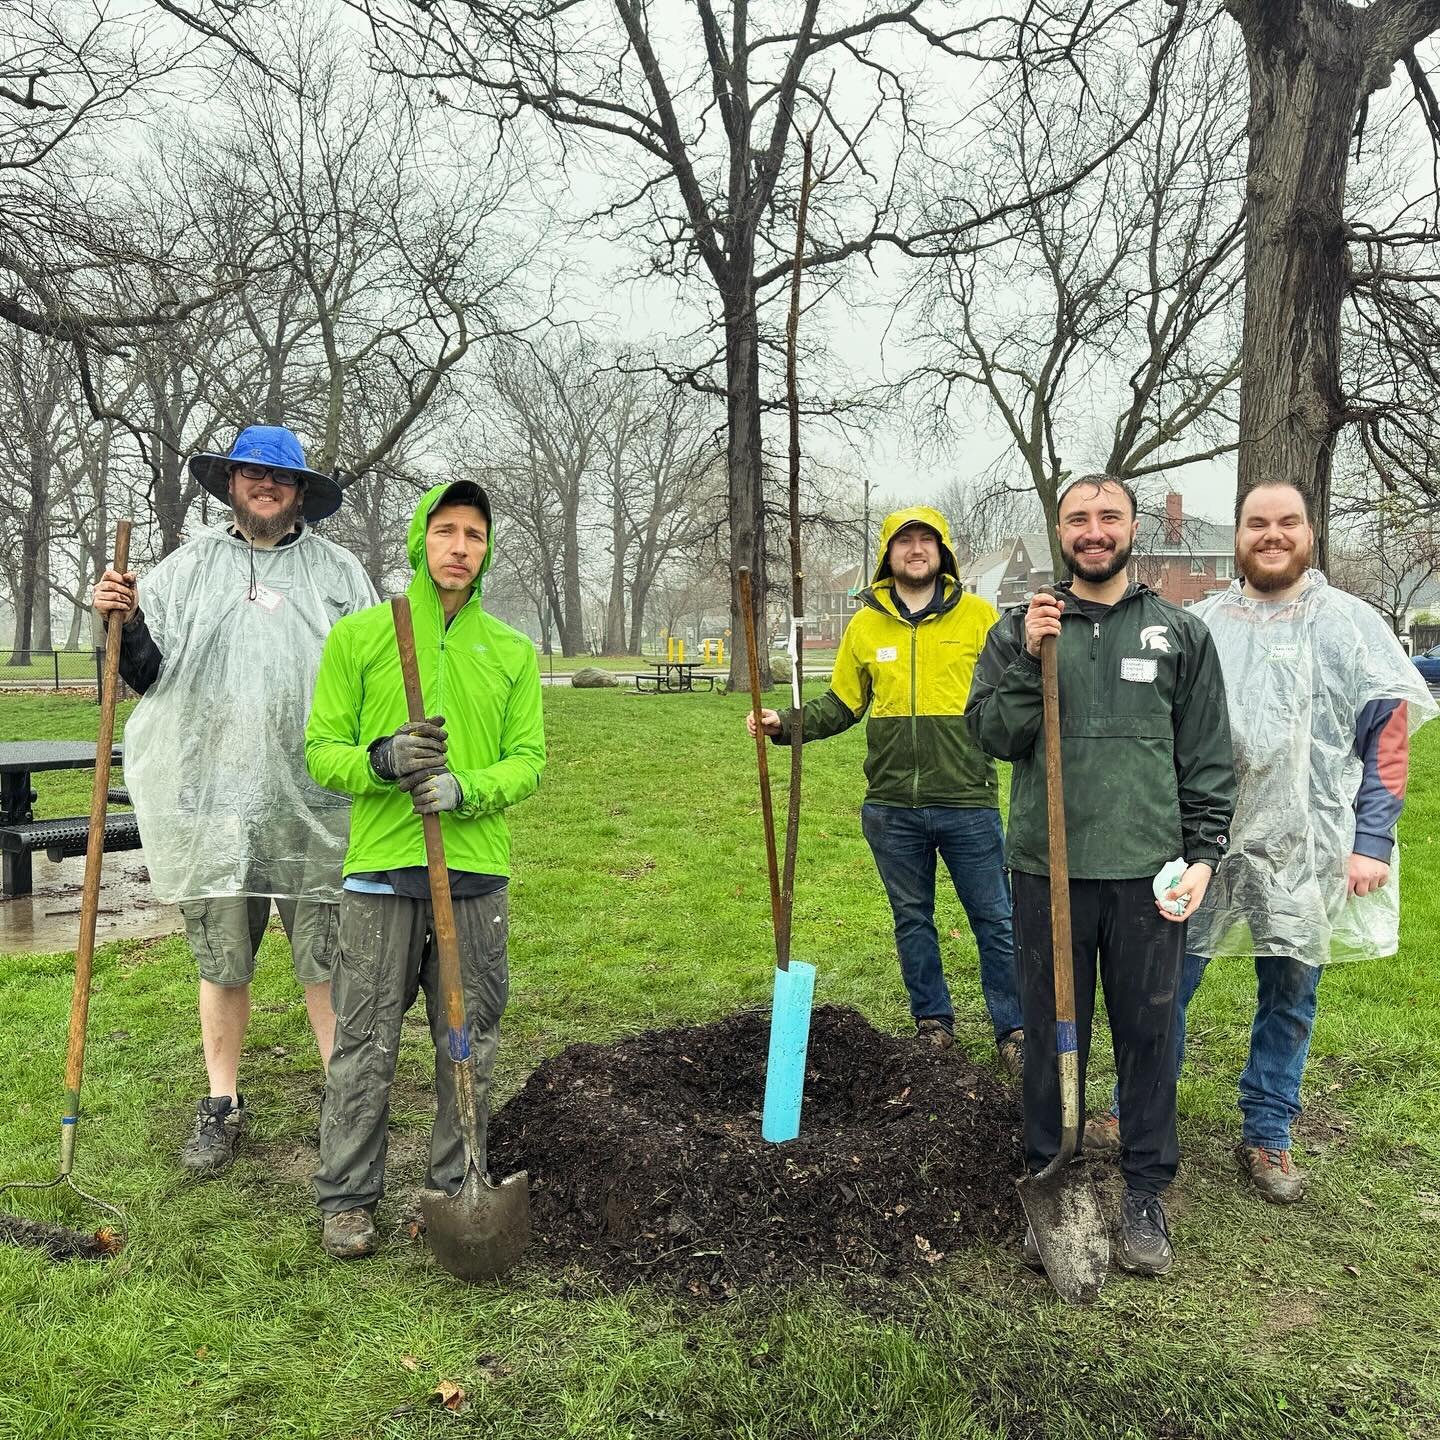 We want to shoutout the employees who volunteered last week in Detroit at Pingree Park! With the other volunteers they planted 100 trees, it was a really great turnout despite the weather ☔
 
🌲 🌳 🌲 🌳 
The Greening of Detroit is a non-profit organ